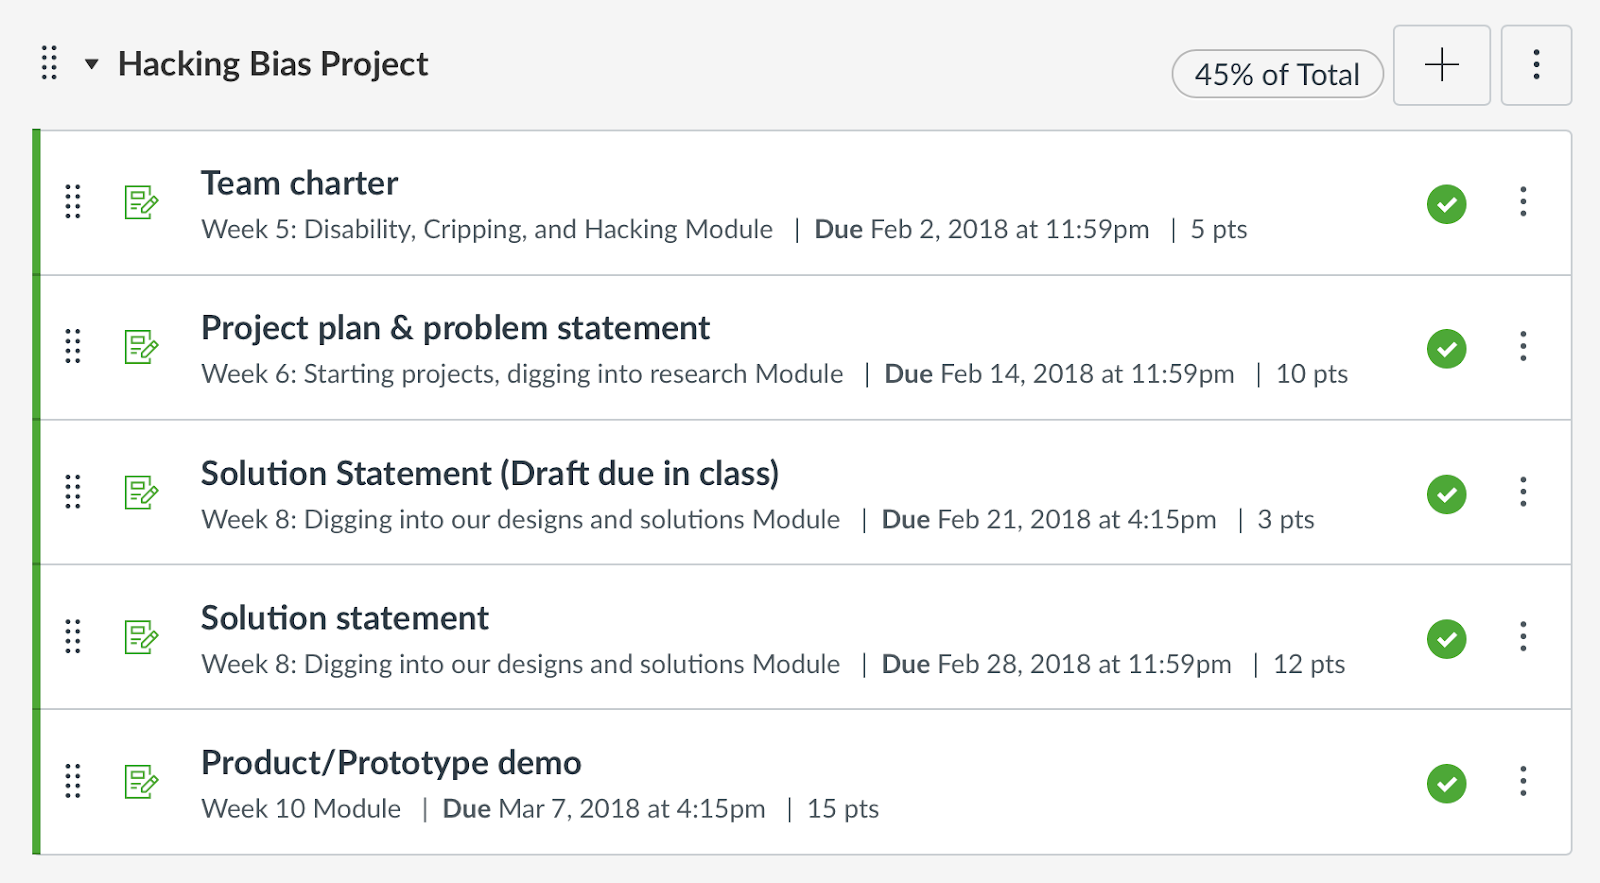 Screenshot of the hacking bias assignment components from the learning management system. Includes team charter, project plan & problem statement, solution statement, and product demo. Each assignment as due dates and the associated points listed. 